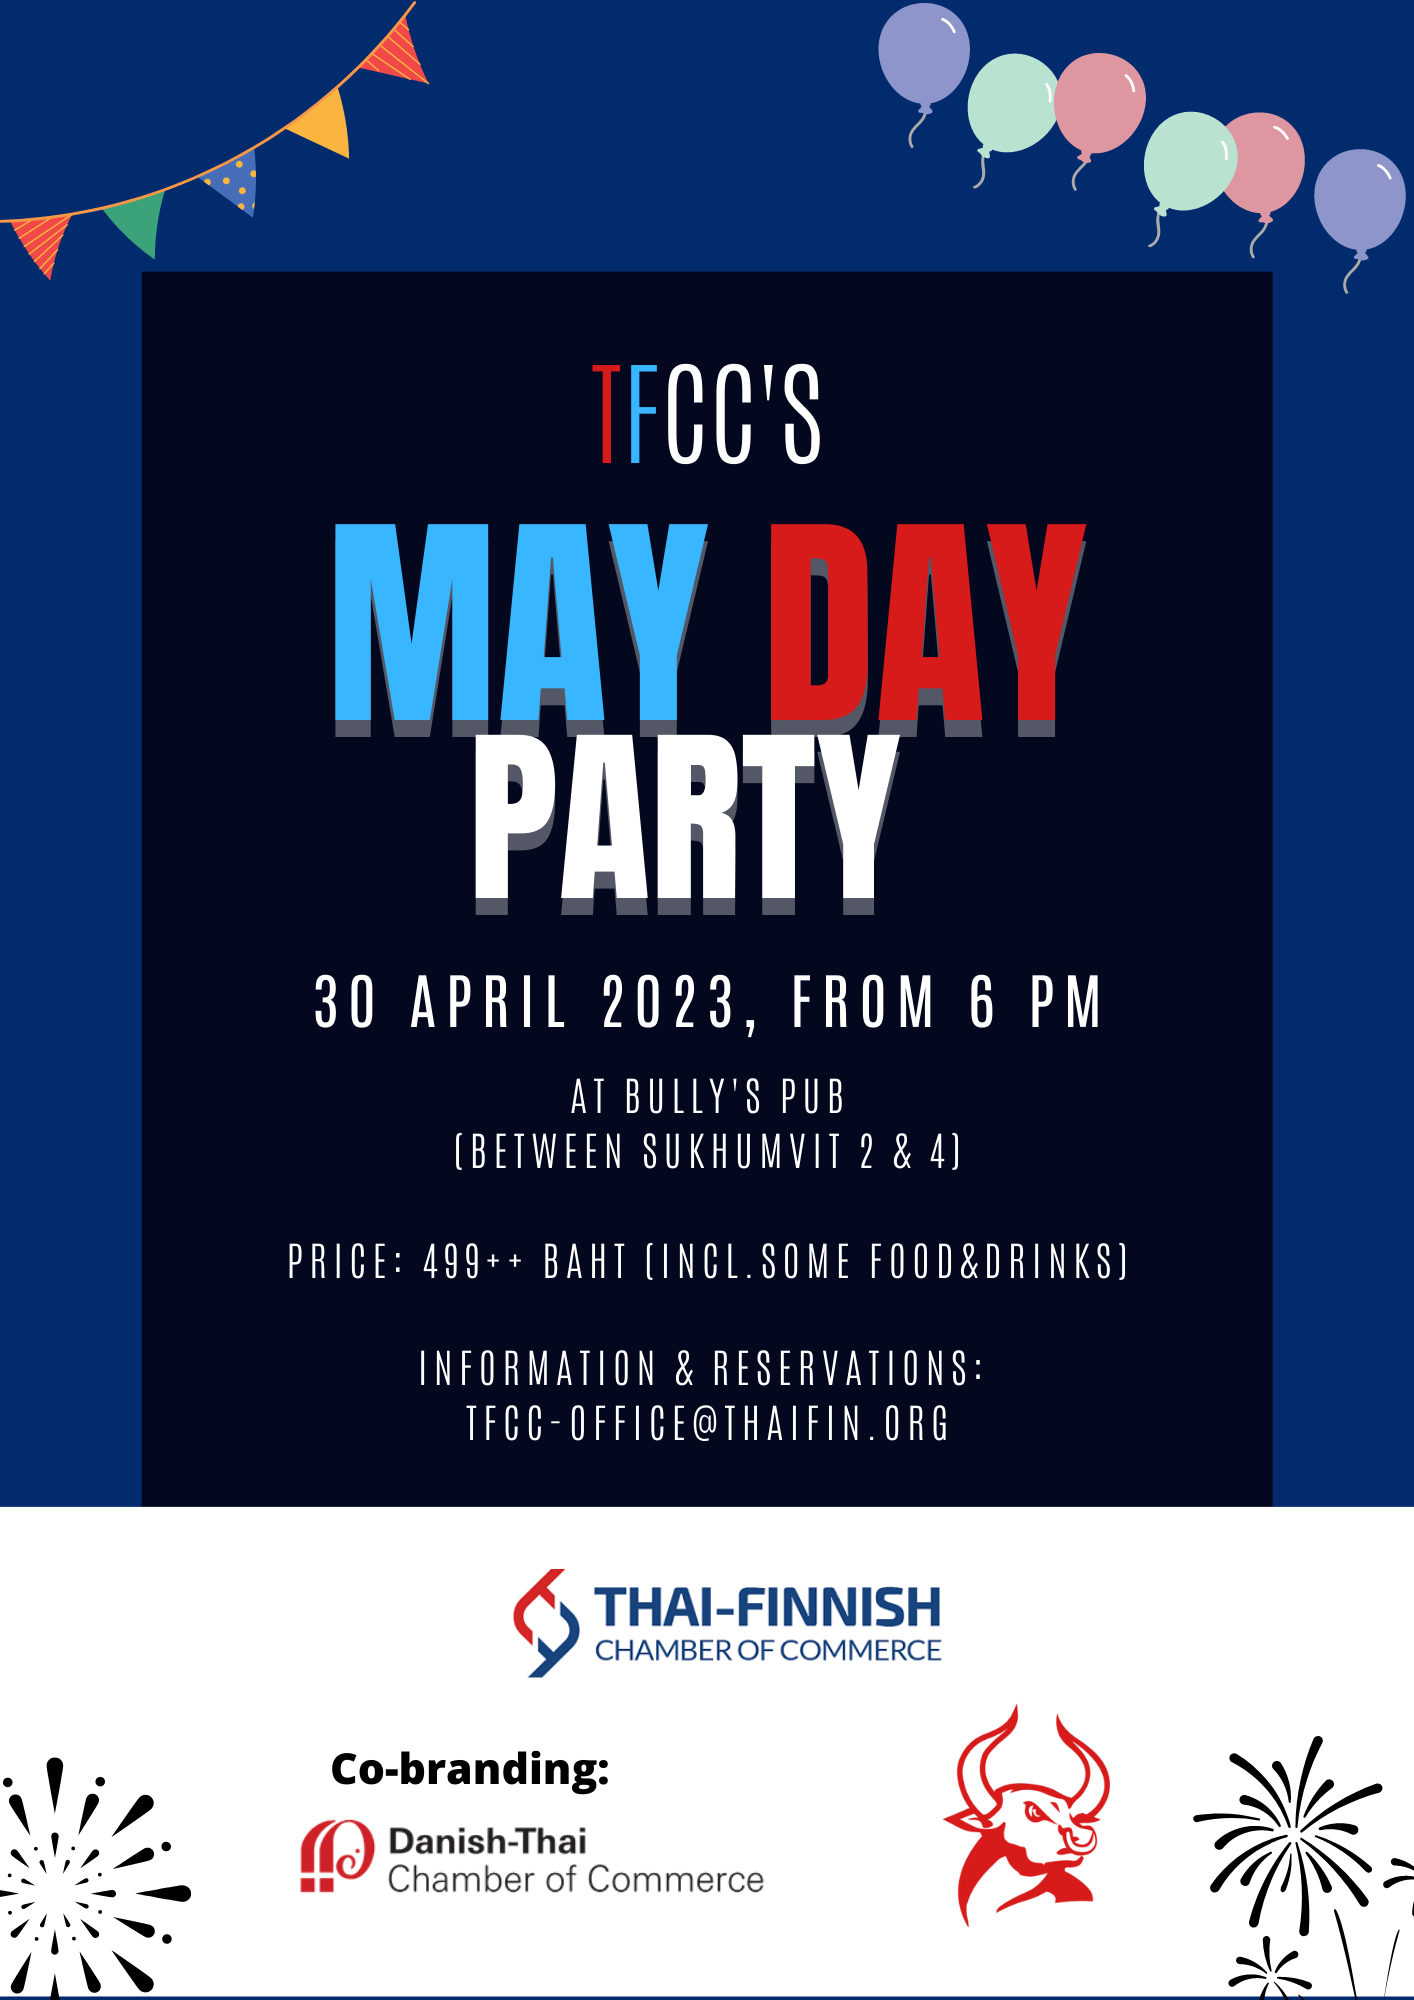 TFCC's May Day Party